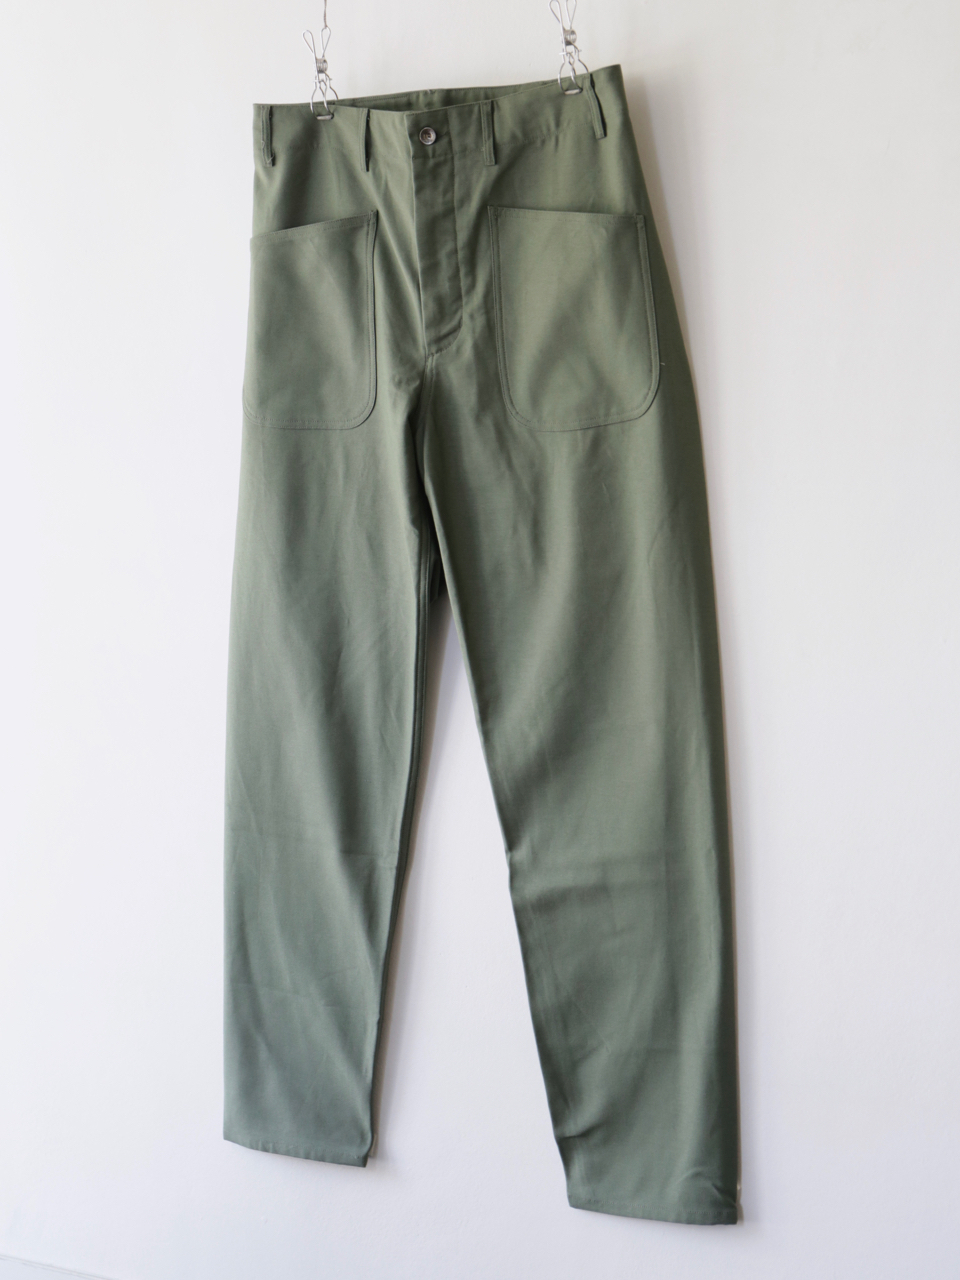 Engineered Garments WORKADAY Utility Pant - Cotton Reversed